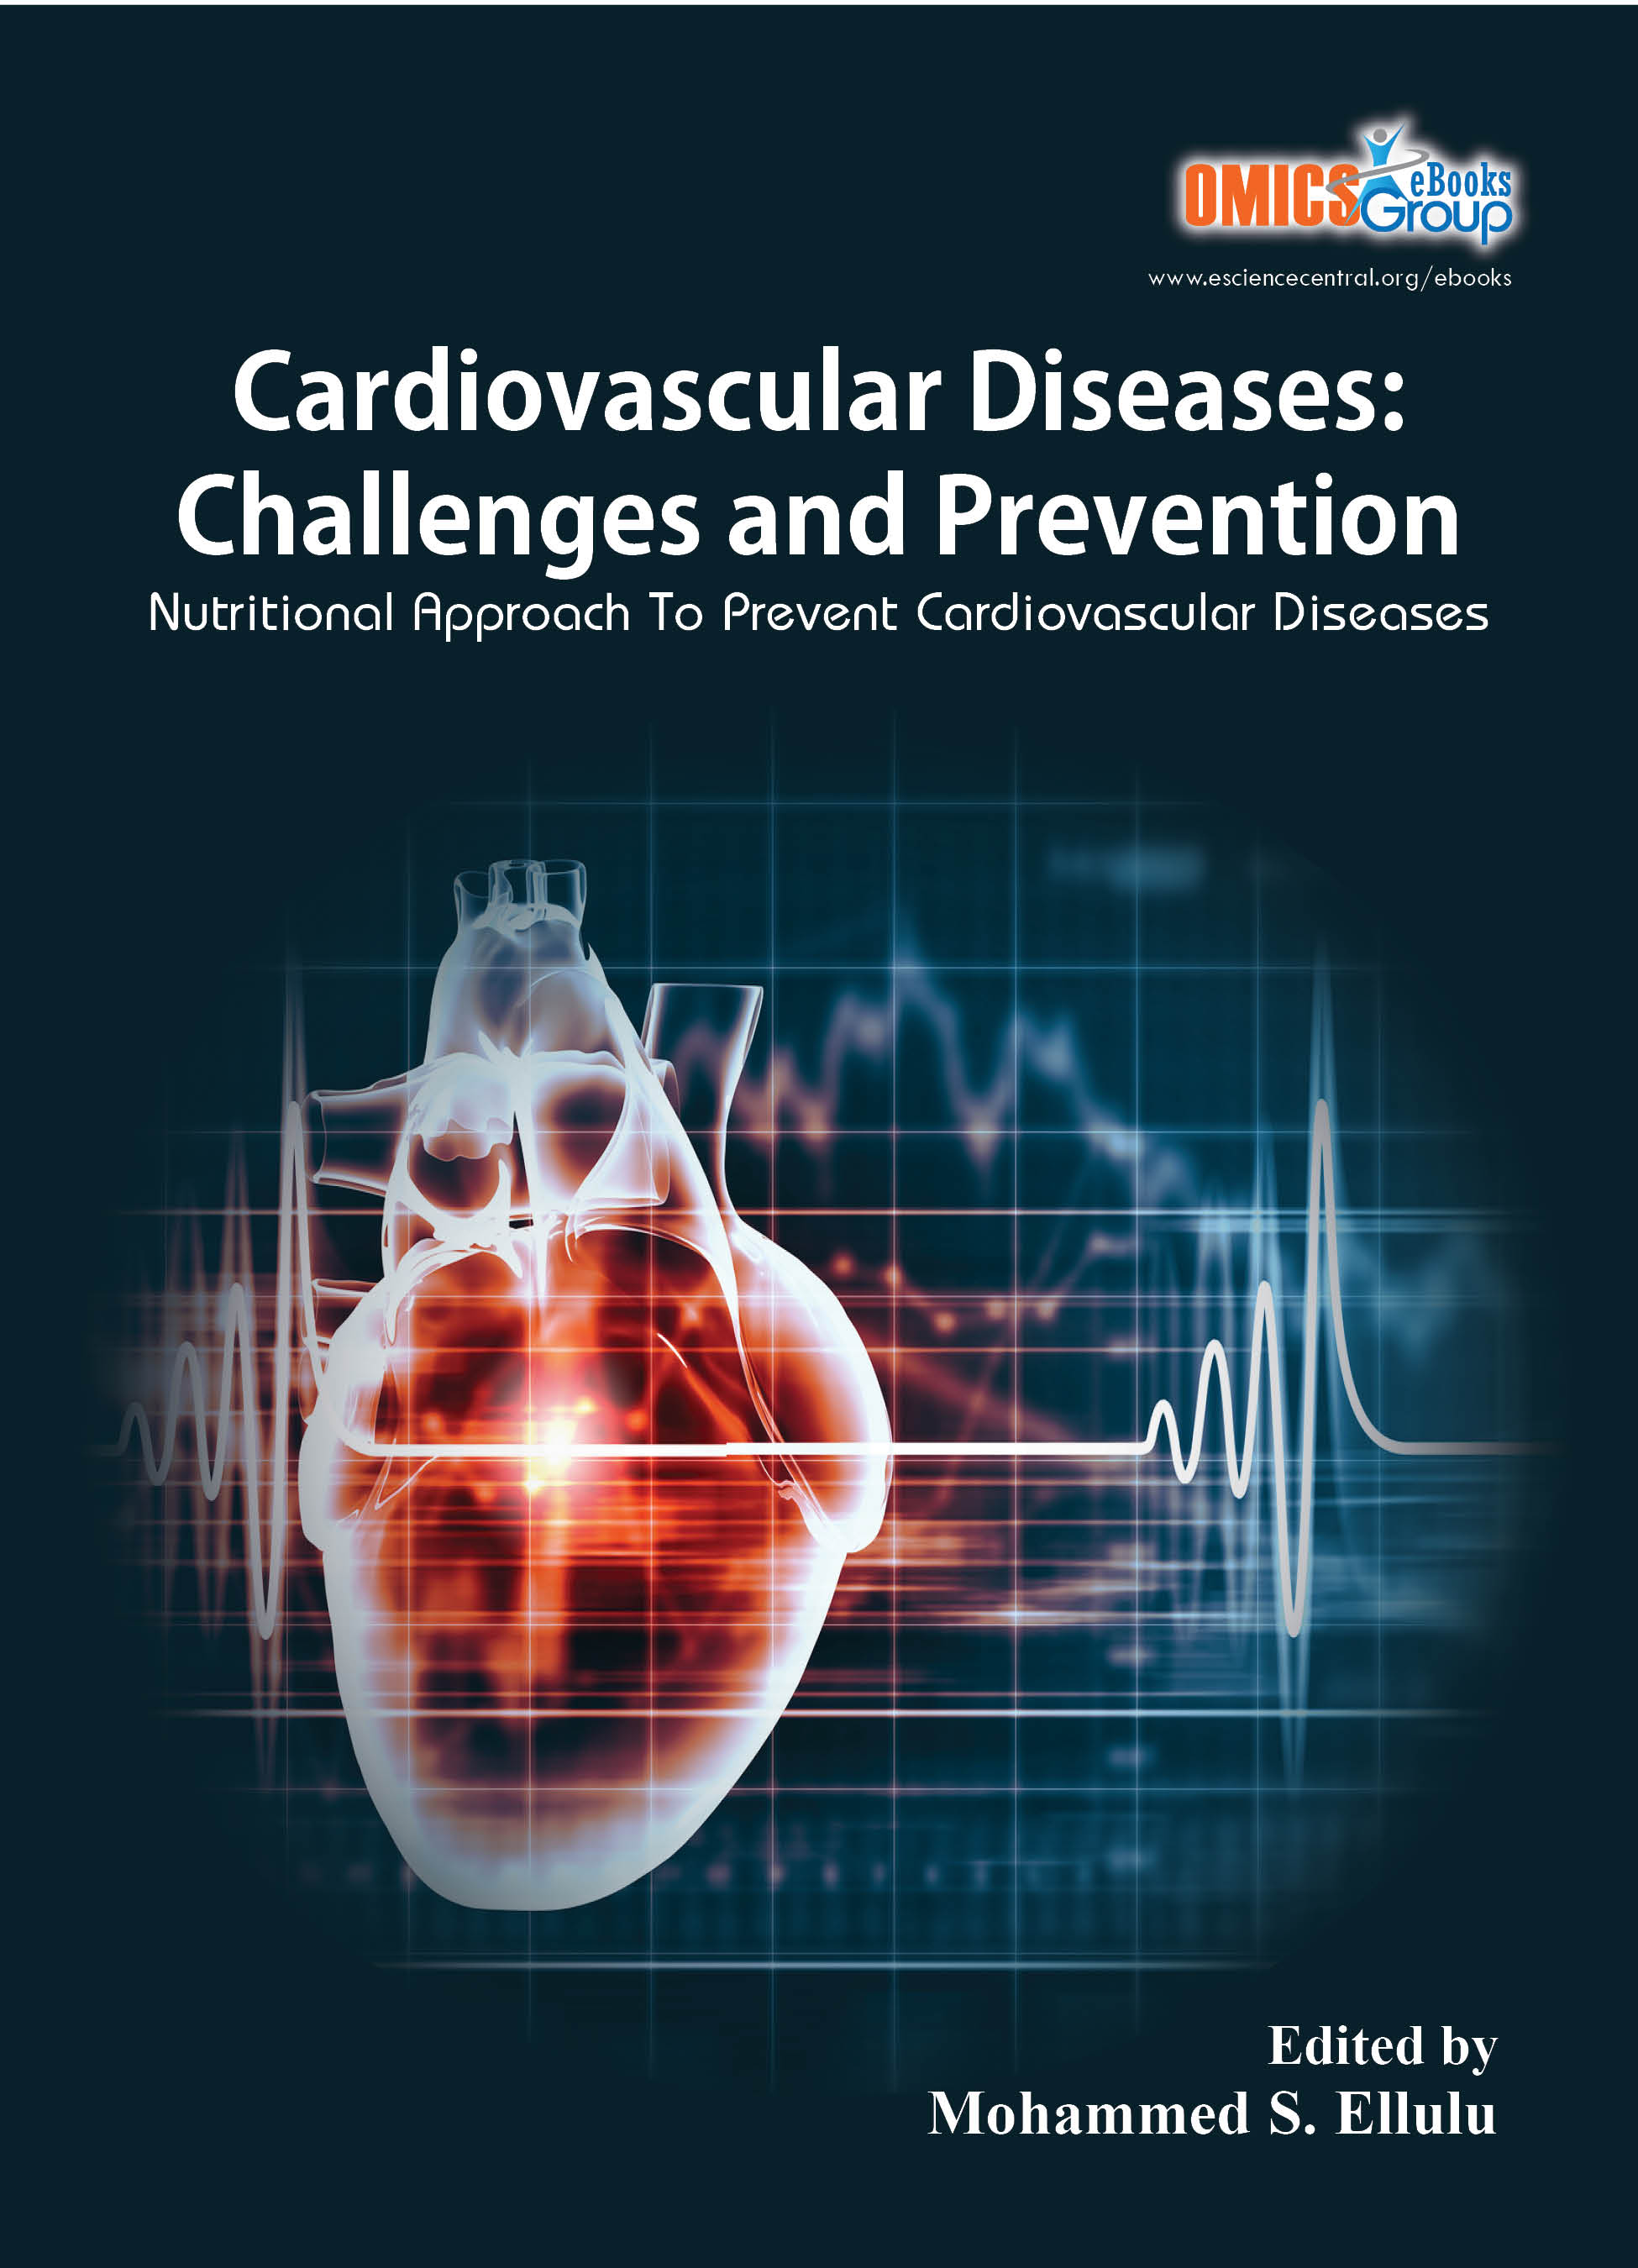 Cardiovascular diseases: Challenges and Prevention